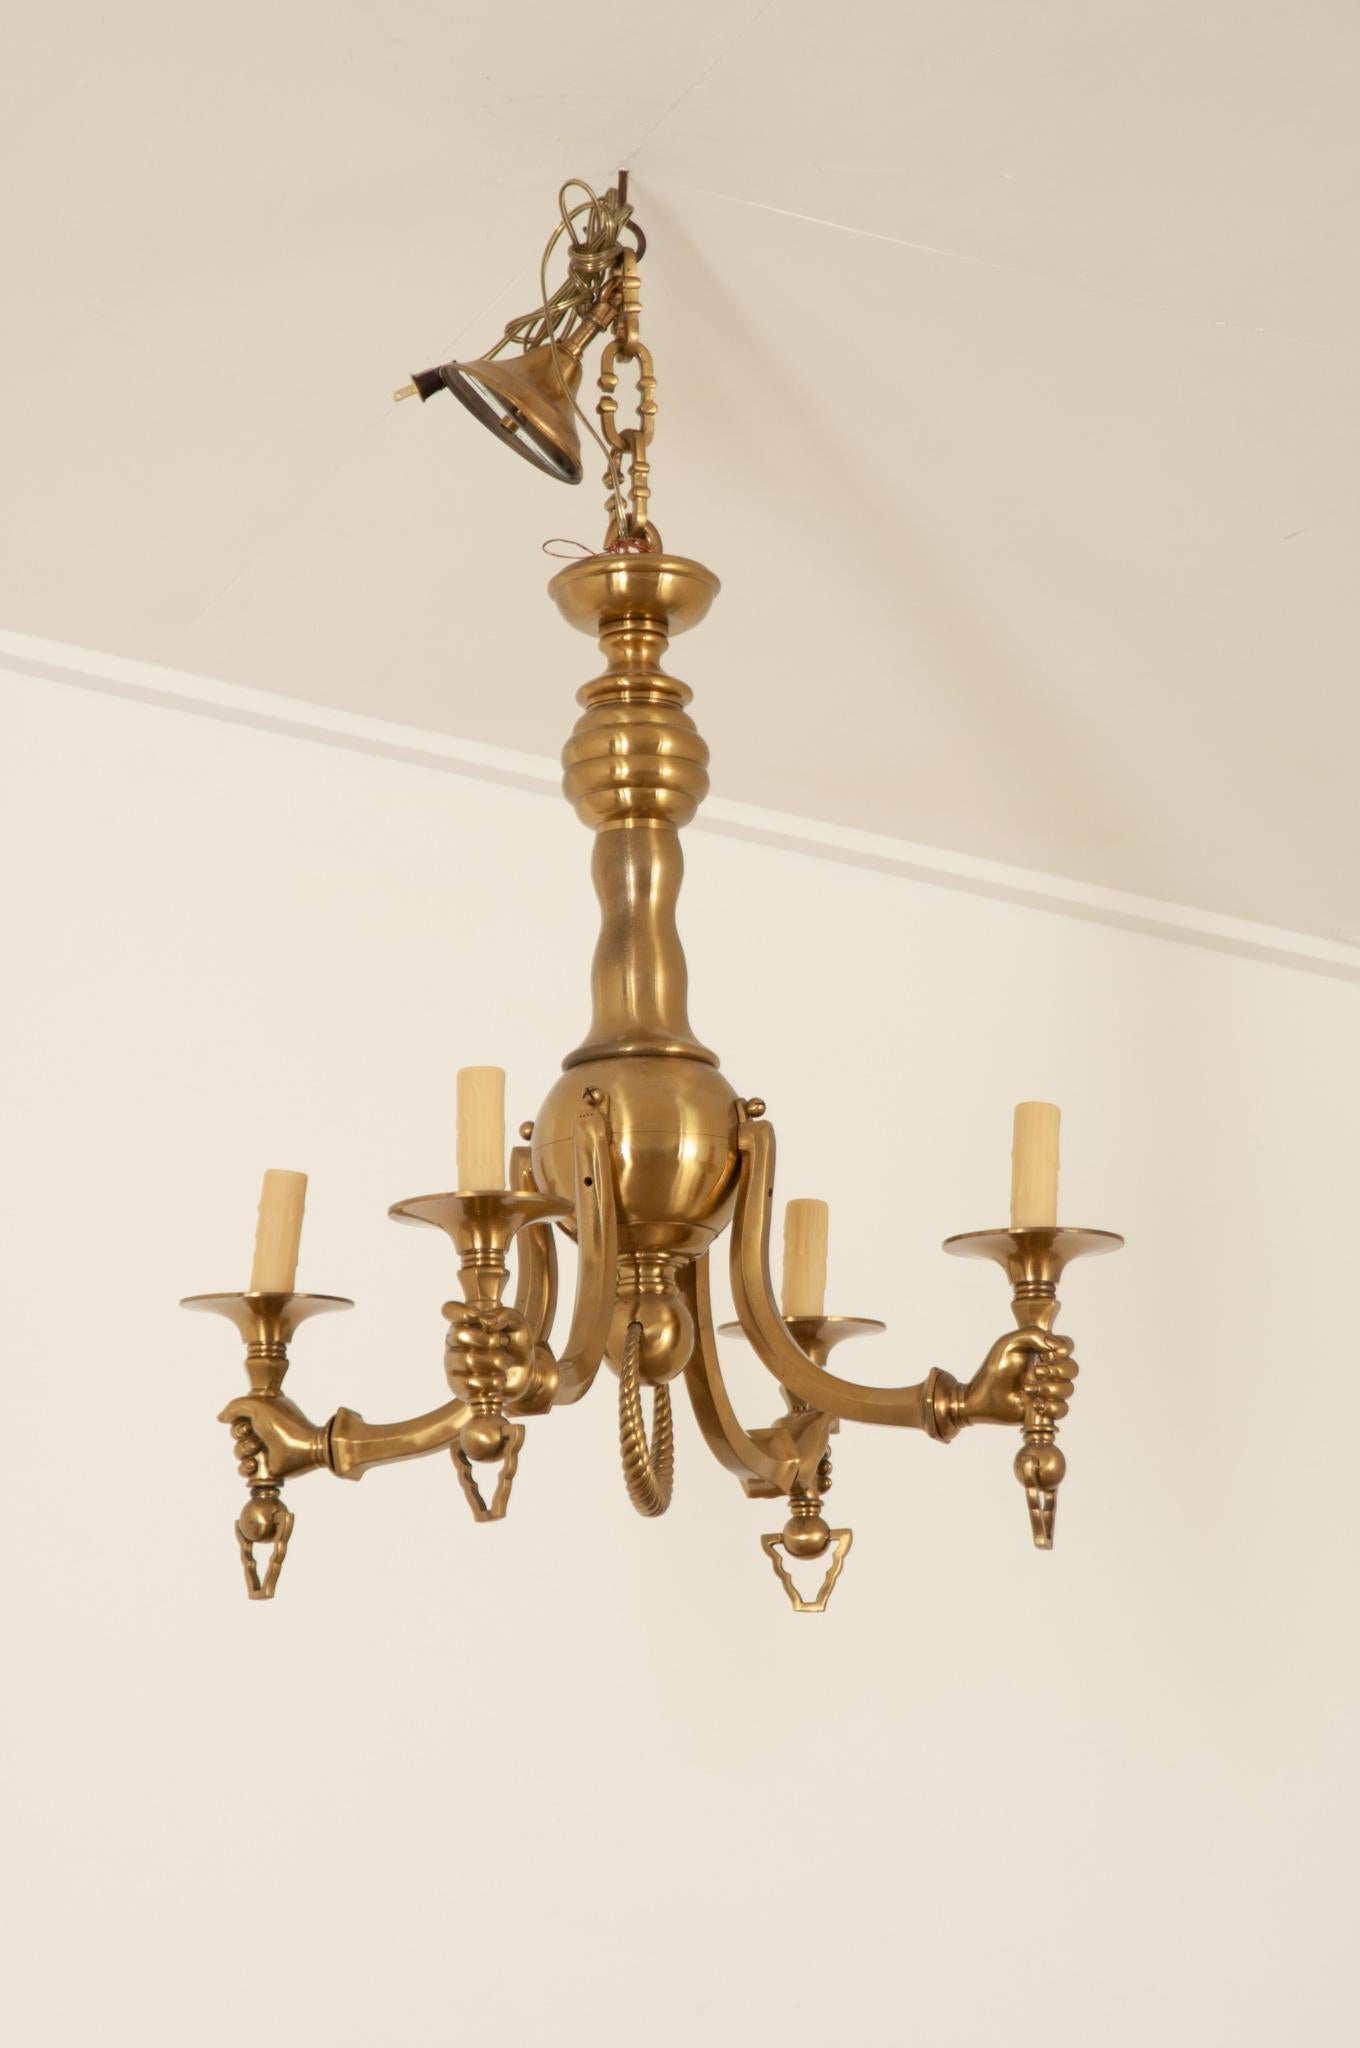 A striking solid brass chandelier from Italy in fantastic vintage condition. The four arms terminate with realistic human hands holding the candlestick. Cream, faux melting candle covers hide the sockets. A decorative chain supports the fixture and